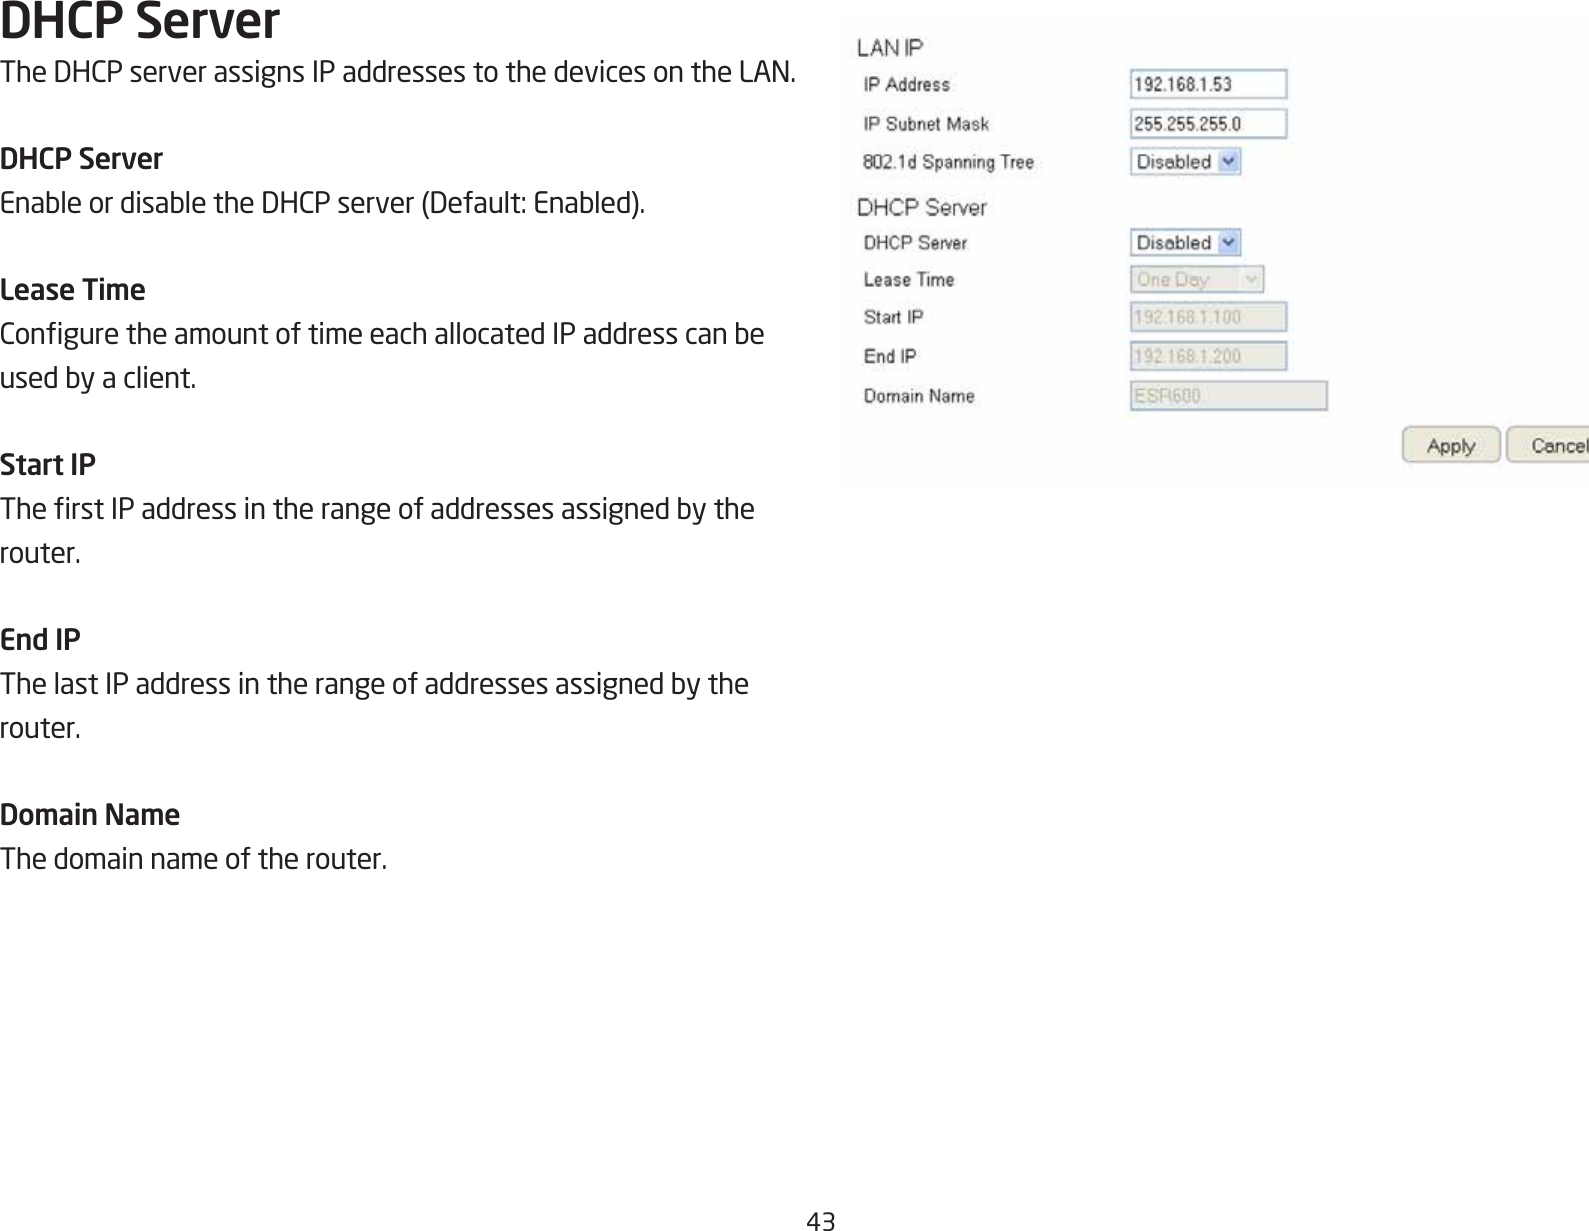 43DHCP ServerTheDHCPserverassignsIPaddressestothedevicesontheLAN.DHCP ServerEnableordisabletheDHCPserver(Default:Enabled).Lease TimeConguretheamountoftimeeachallocatedIPaddresscanbeusedbyaclient.Start IPTherstIPaddressintherangeofaddressesassignedbytherouter.End IPThelastIPaddressintherangeofaddressesassignedbytherouter.Domain NameThe domain name of the router.